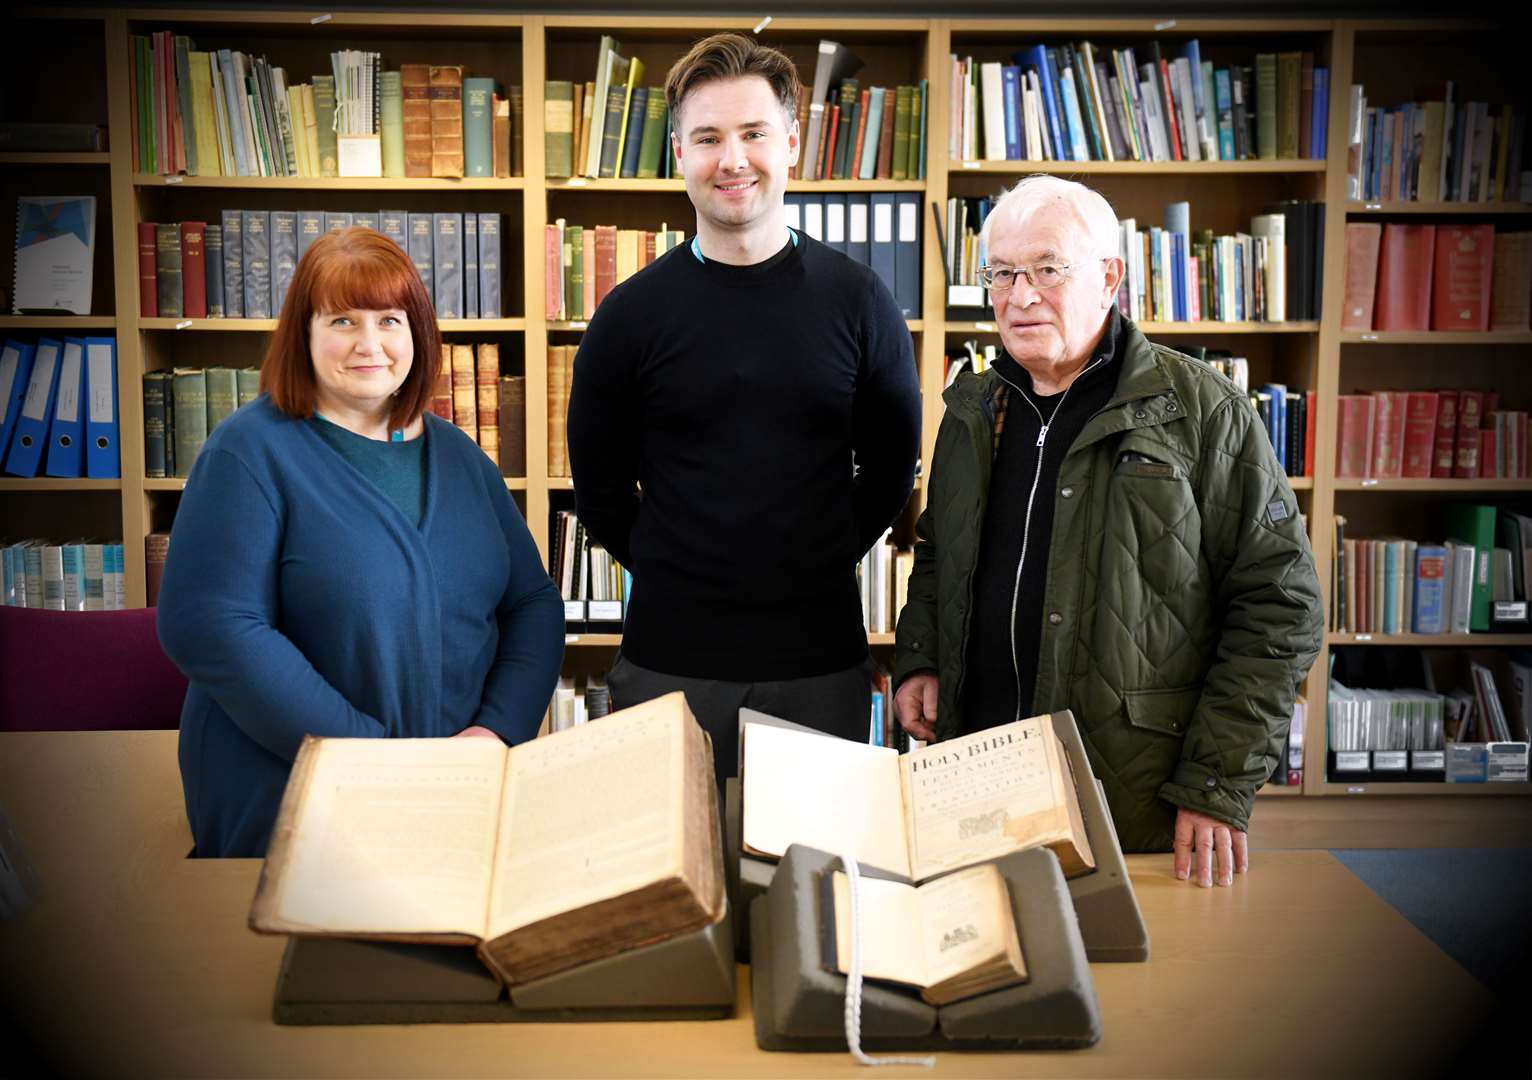 Fiona Macleod and David Highet of the Highland Archive Center and Willie Morrison, church member.